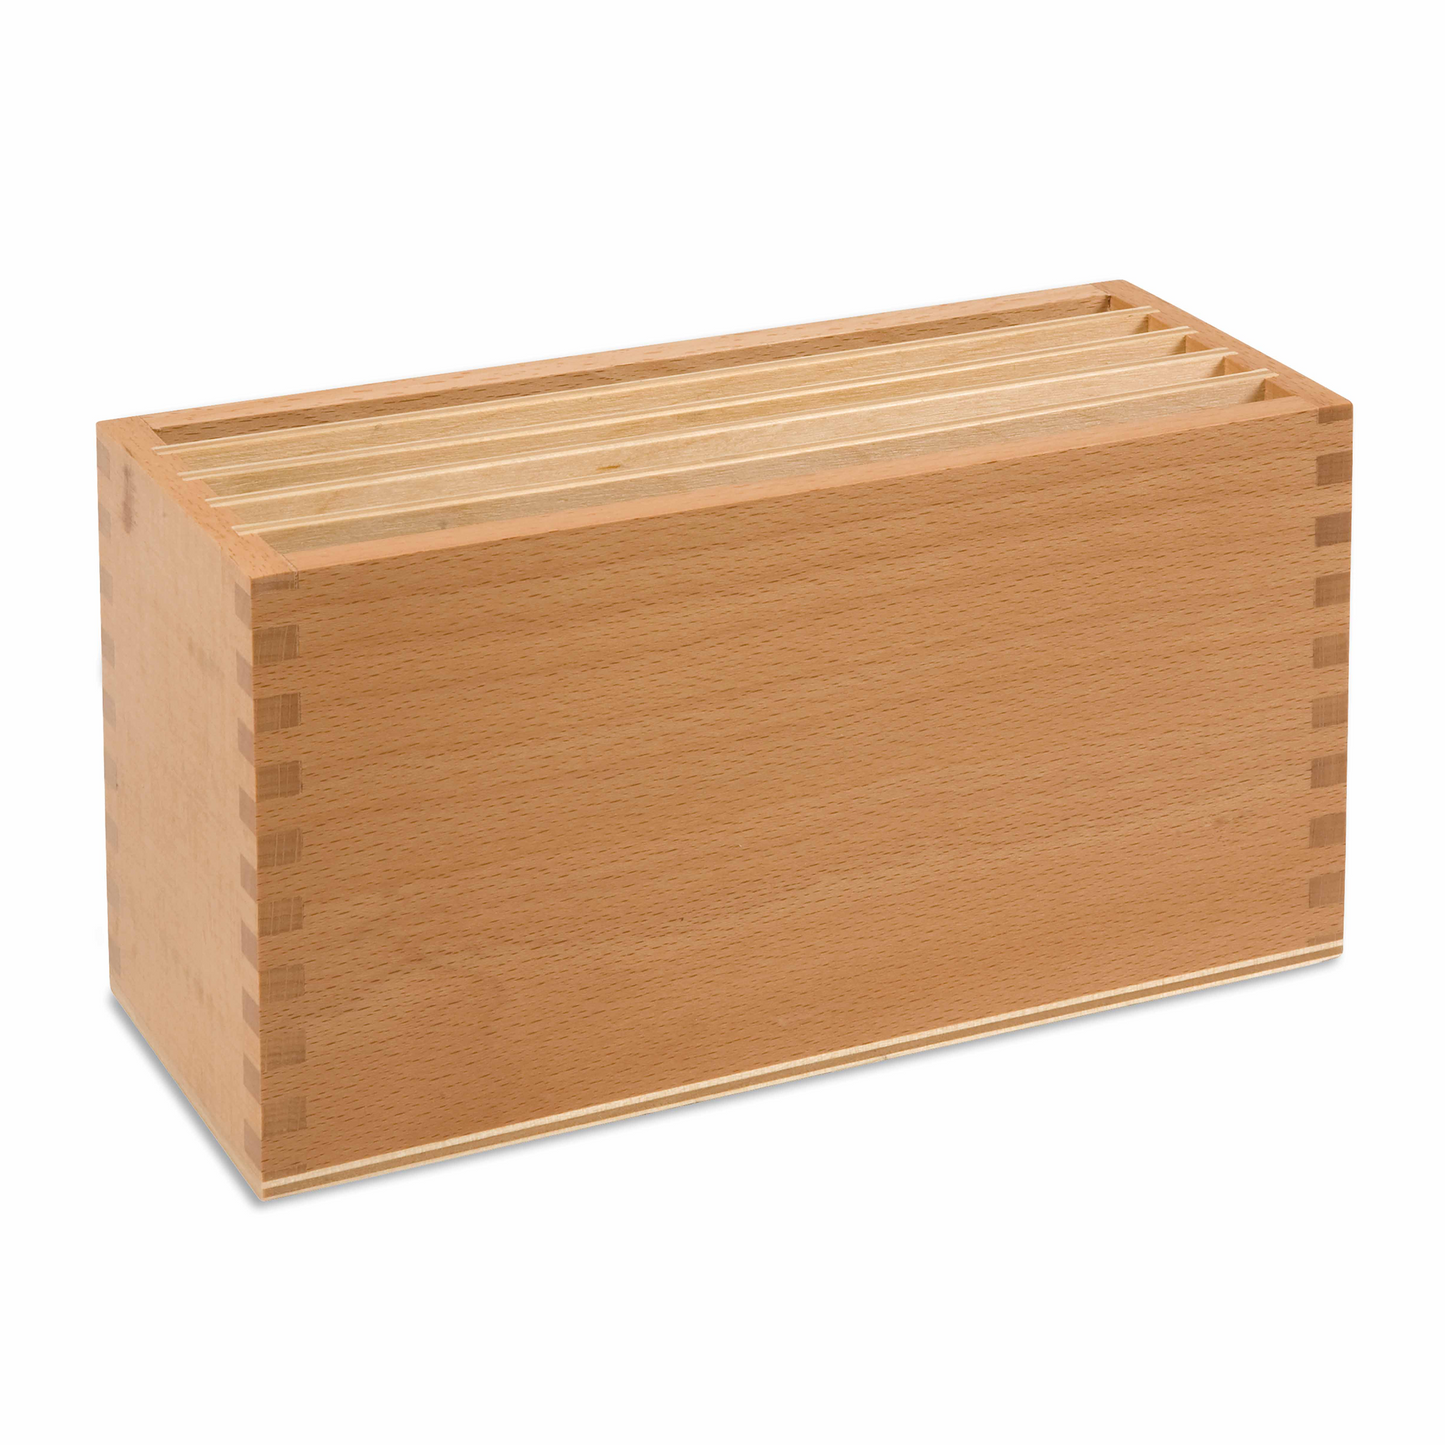 Box for maps of geographical shapes - Nienhuis AMI